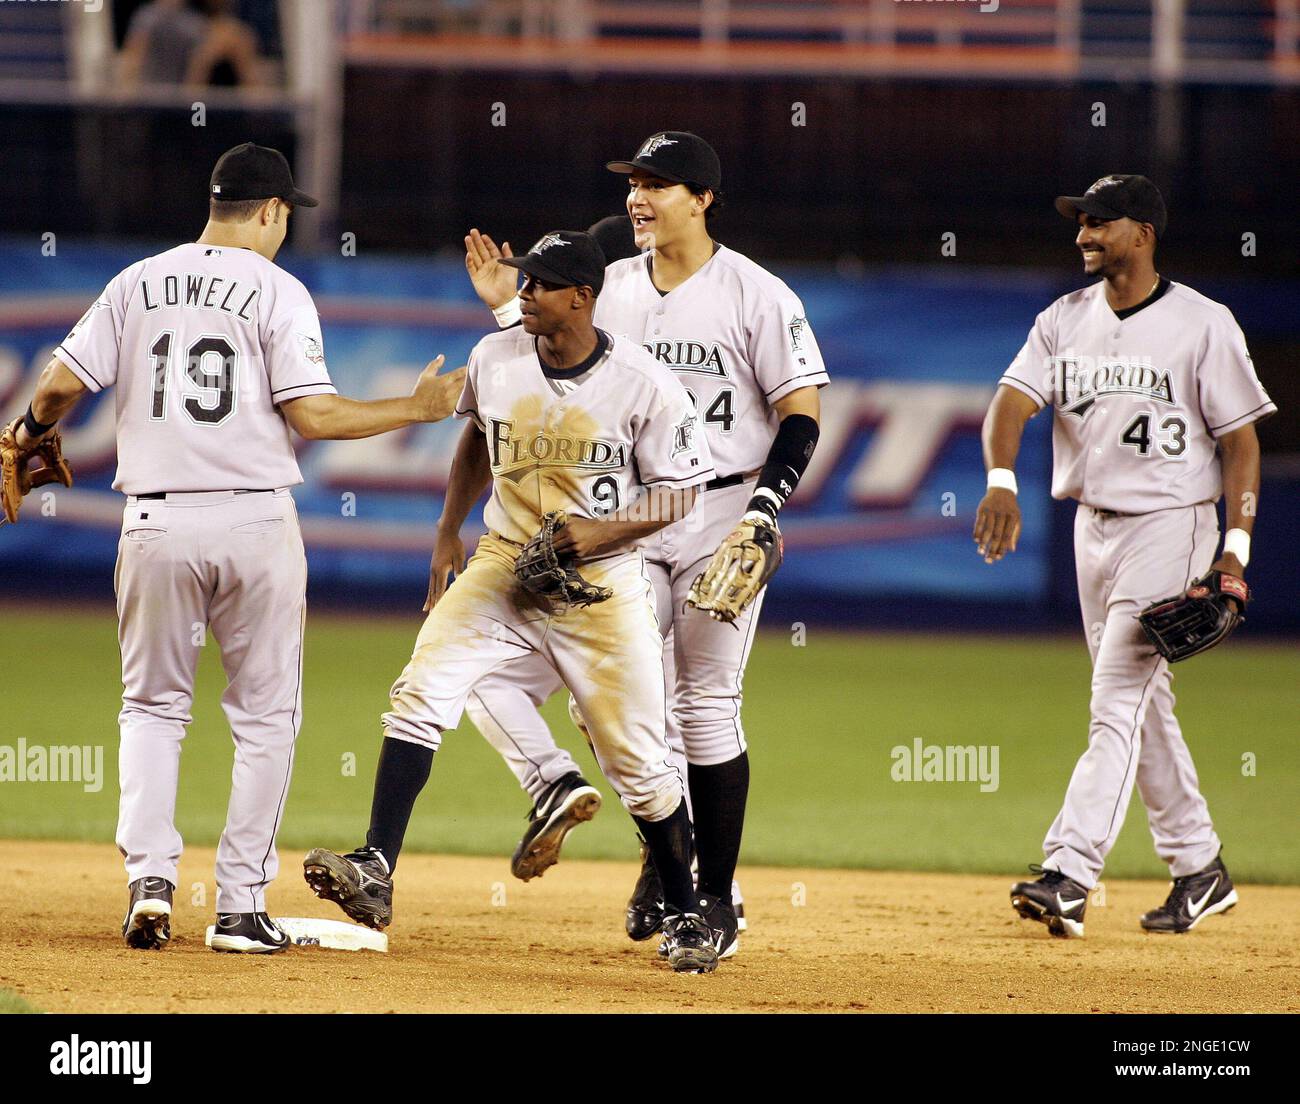 Florida Marlins from left, Mike Lowell, Juan Pierre, MIguel